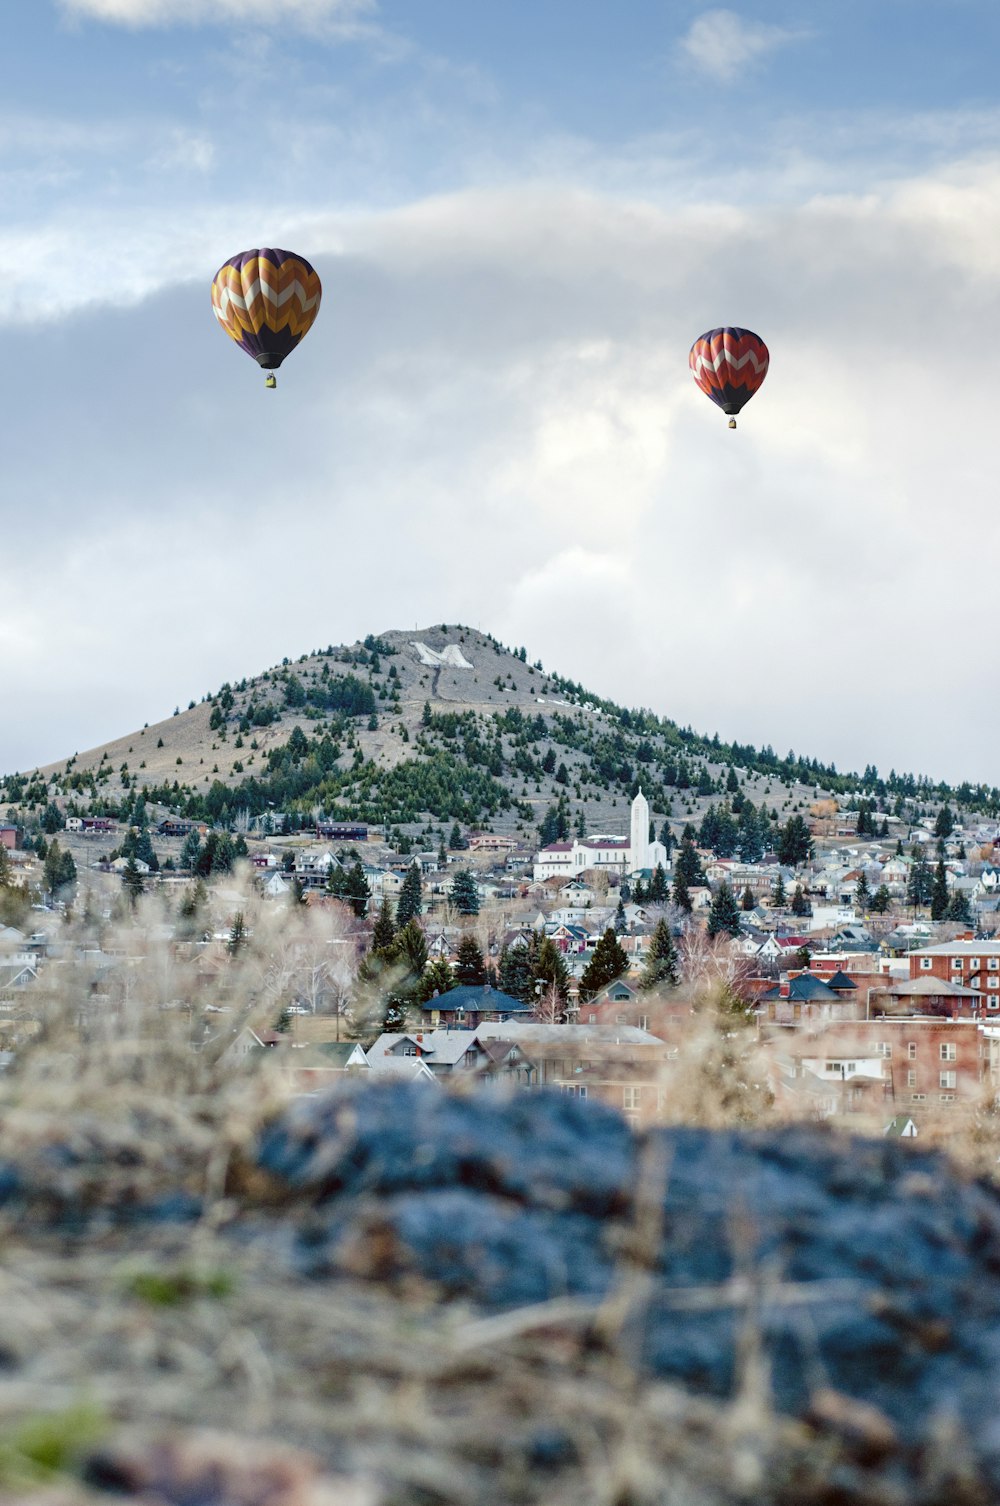 two assorted-color hot air balloons on air near mountain at daytime